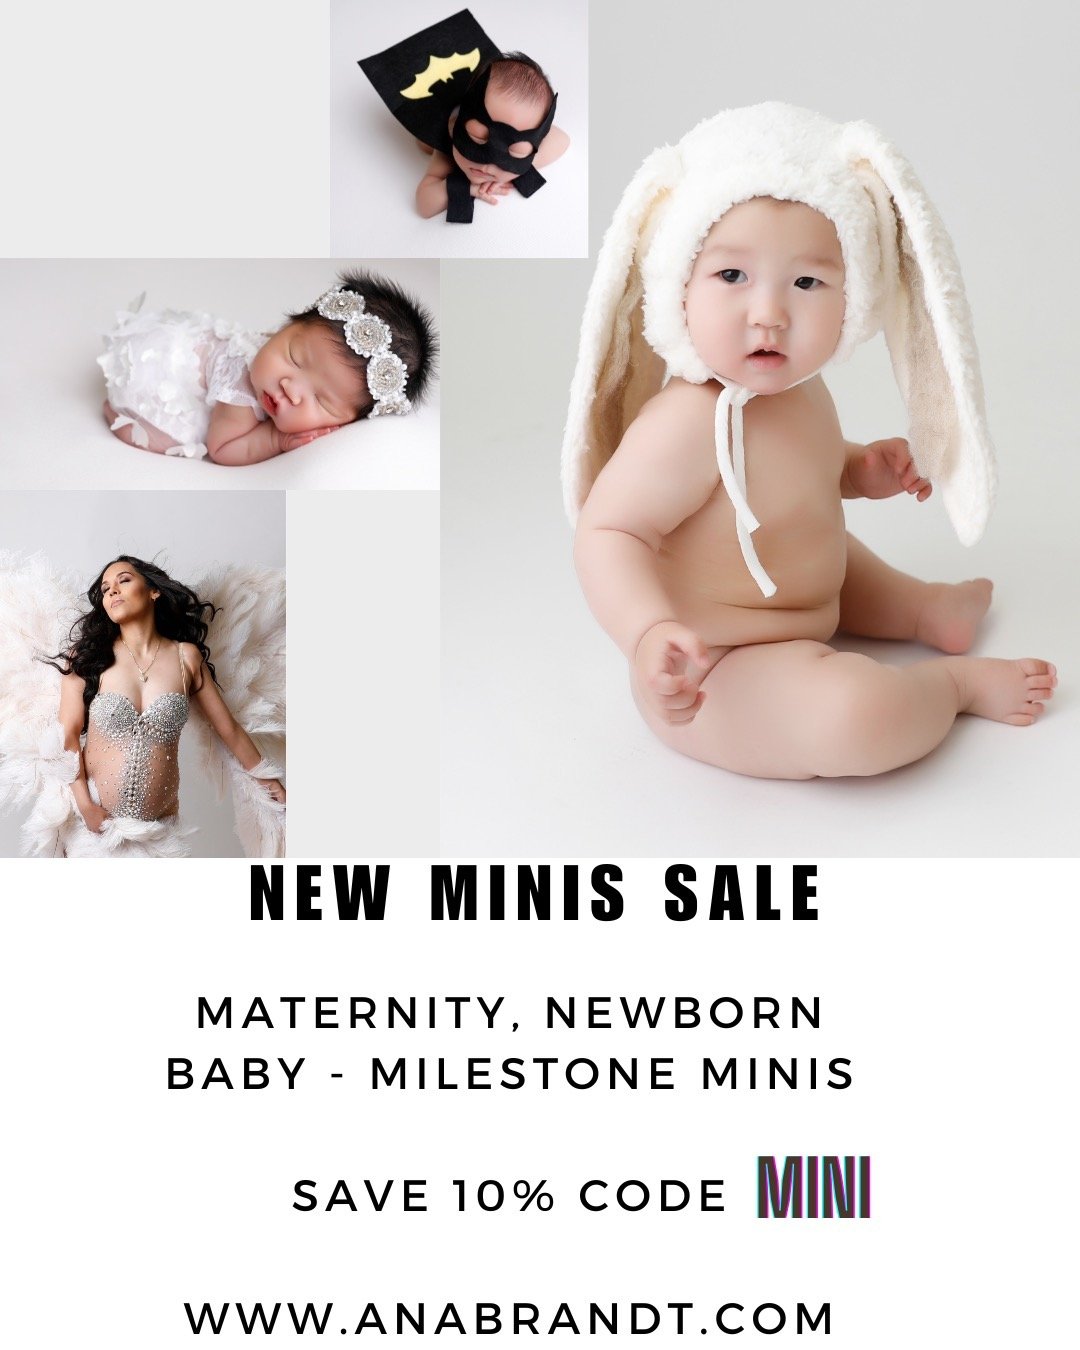 It's May and all our Minis are back. We only bring maternity and newborn minis out a few times a year.

Save on Maternity, Newborn, Baby and Birthday minis.

Use code MINIS to save 10%

Purchase any mini now and schedule when ready - they do not expi